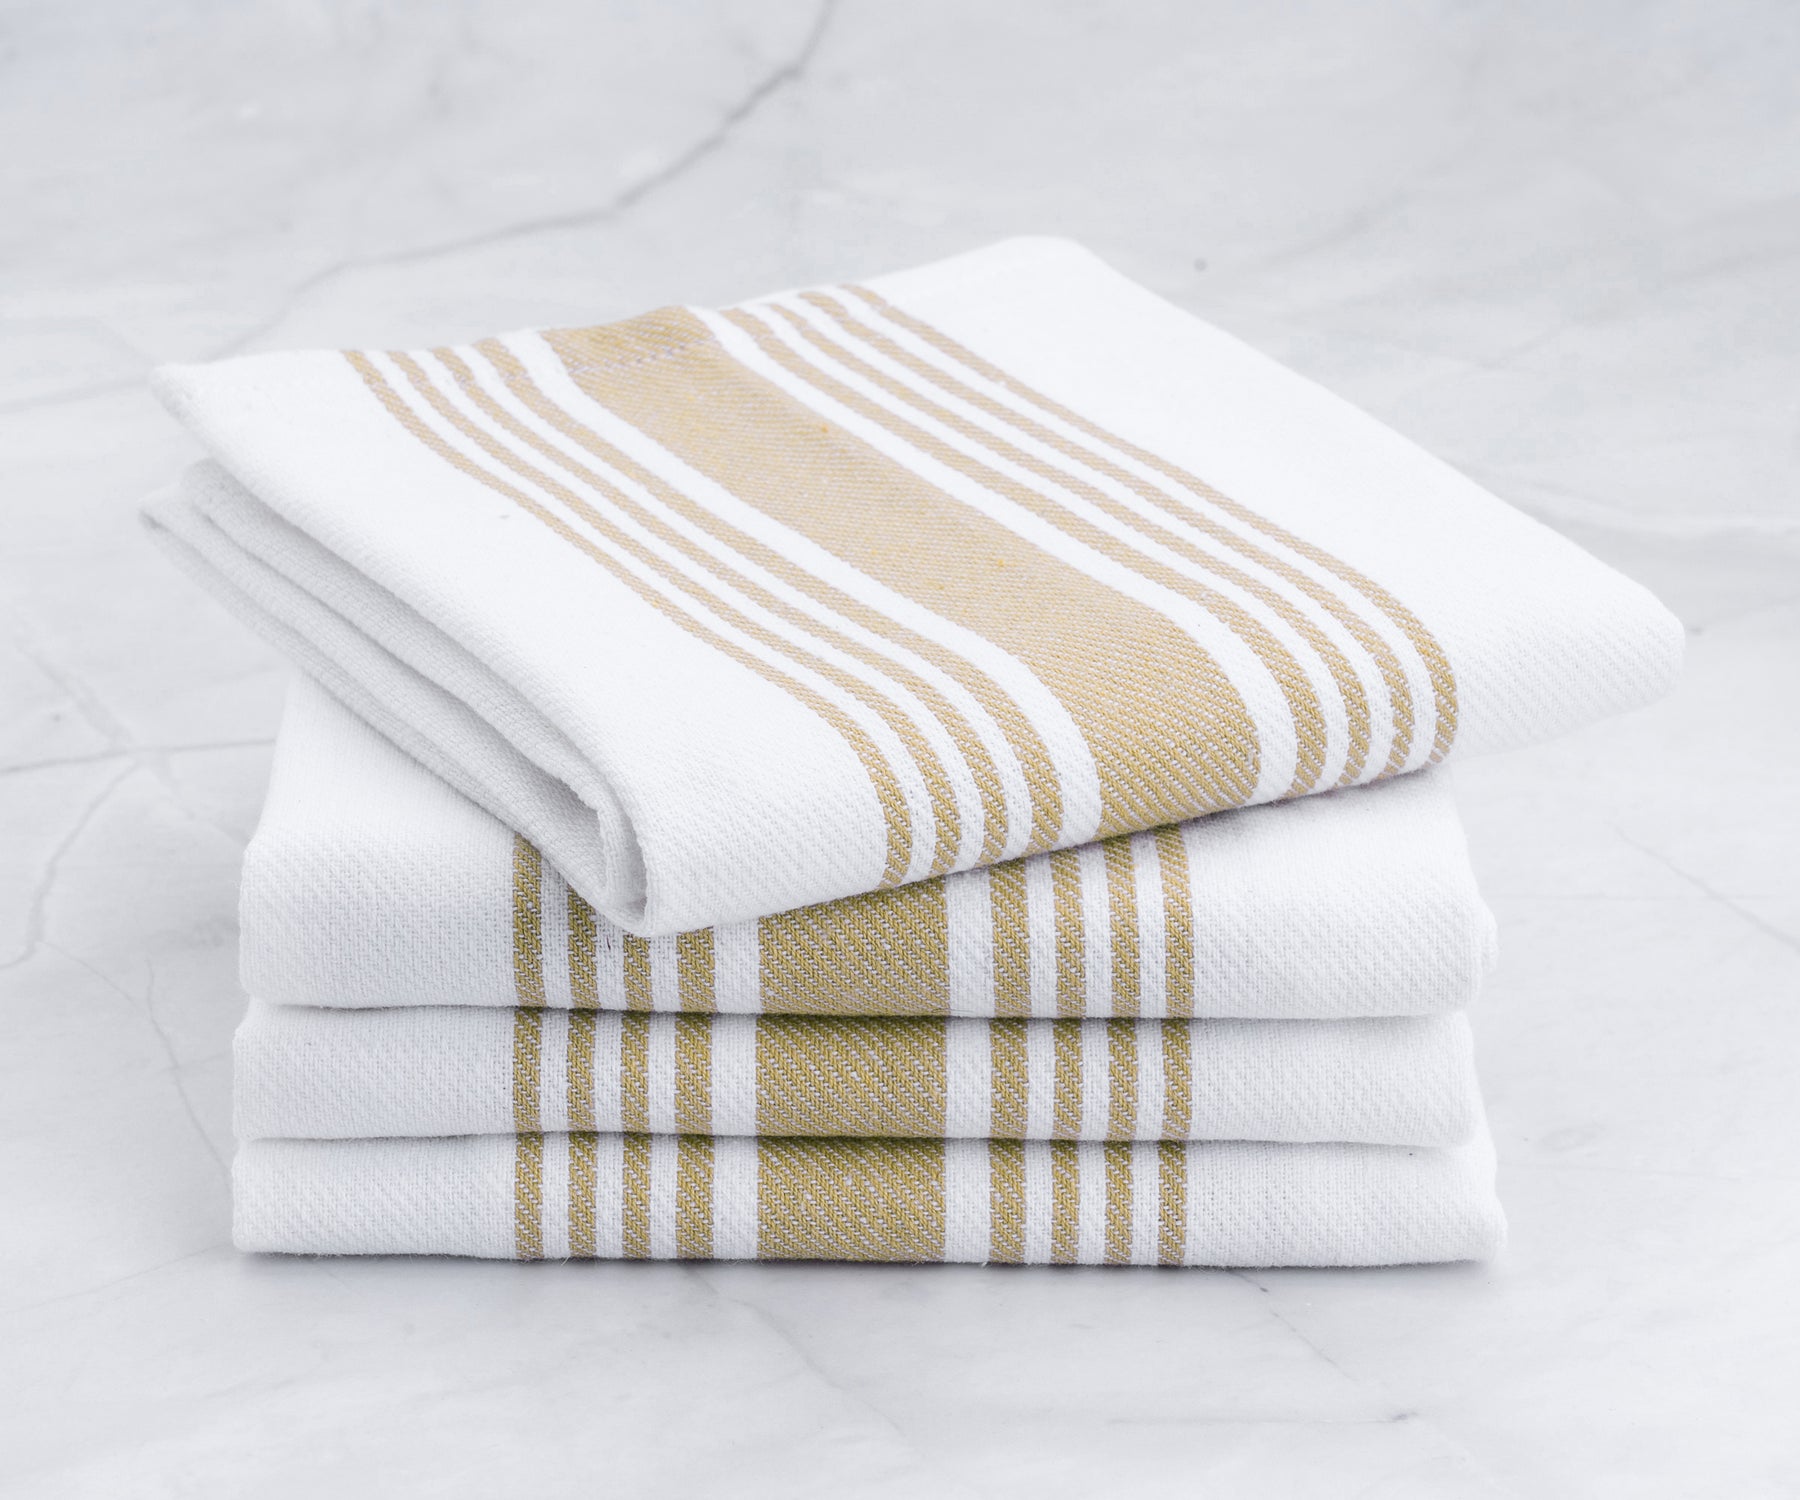 All Cotton and Linen Kitchen Towels, Cotton Dish Towels, Buffalo Check  Farmhouse Tea Towels Navy/Cream Set of 3 (18 x 28)